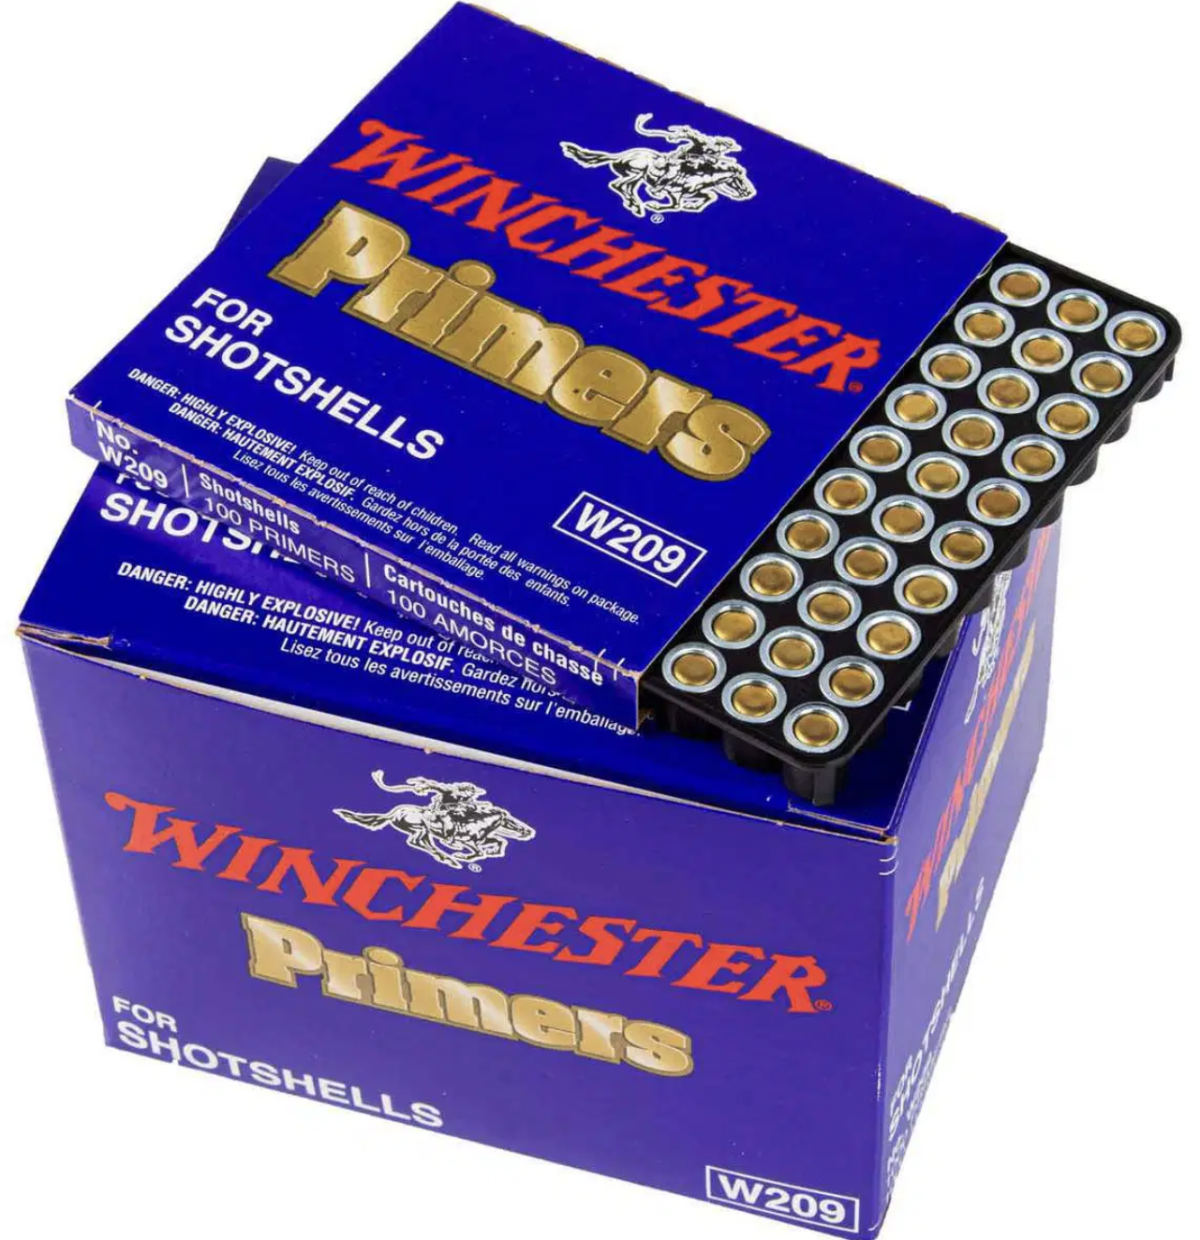 Buy 209 primers In Stock Now Available At Ammo Master - Ammo master - Ammo Depot USA